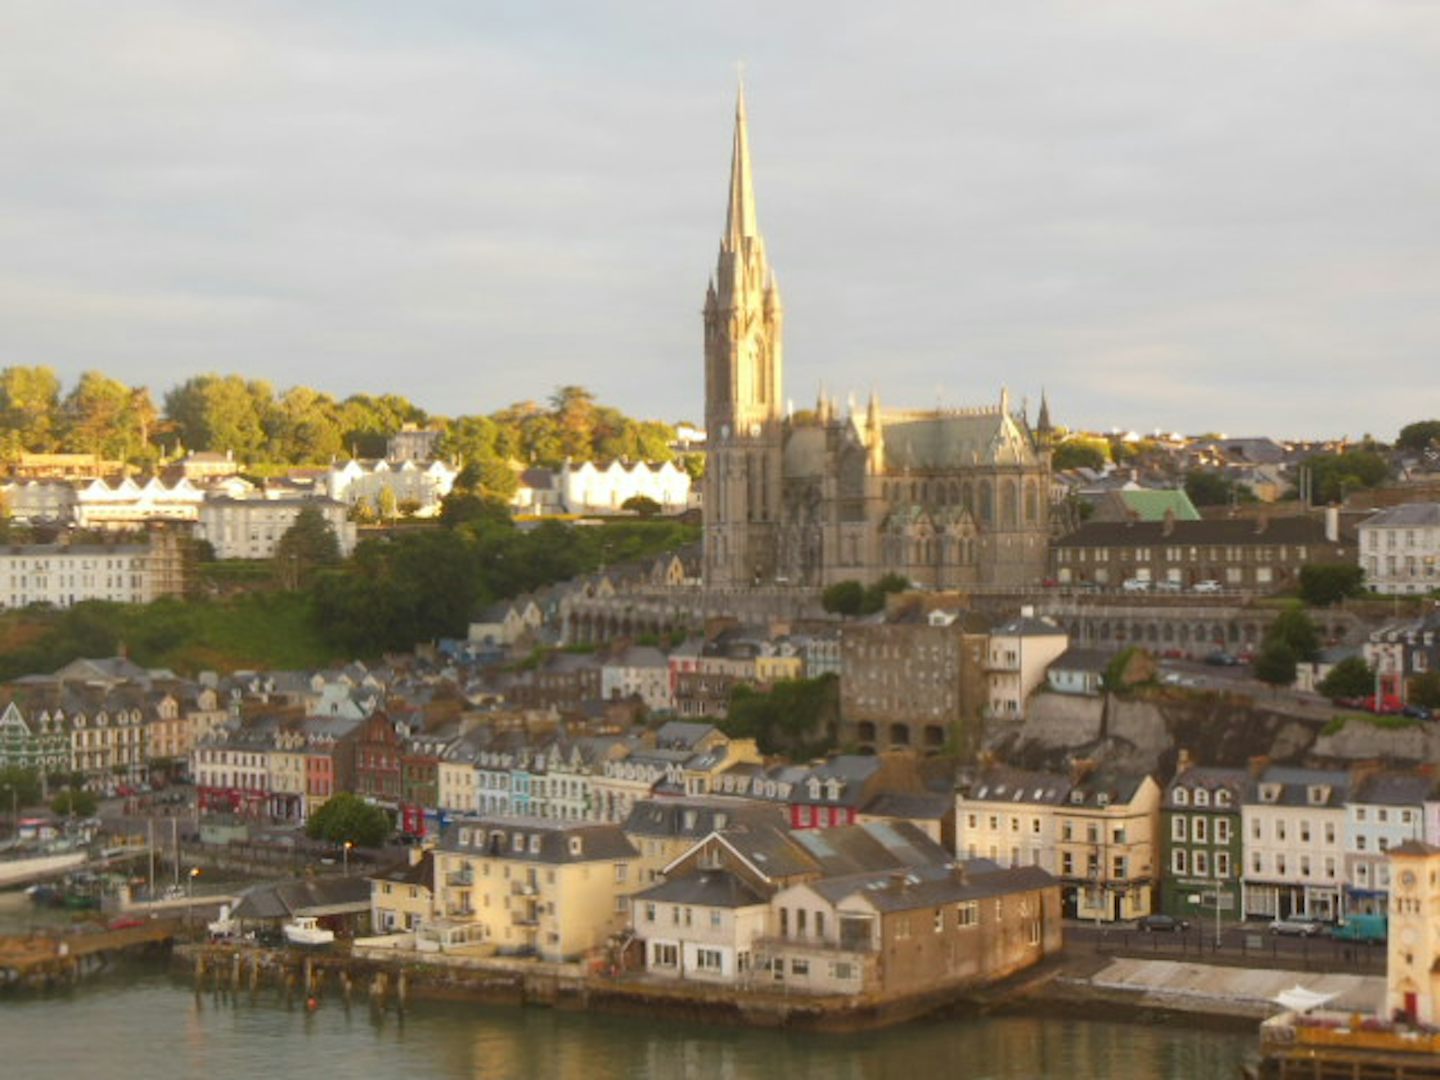 Cobh, Ireland. St Colman's Cathedral